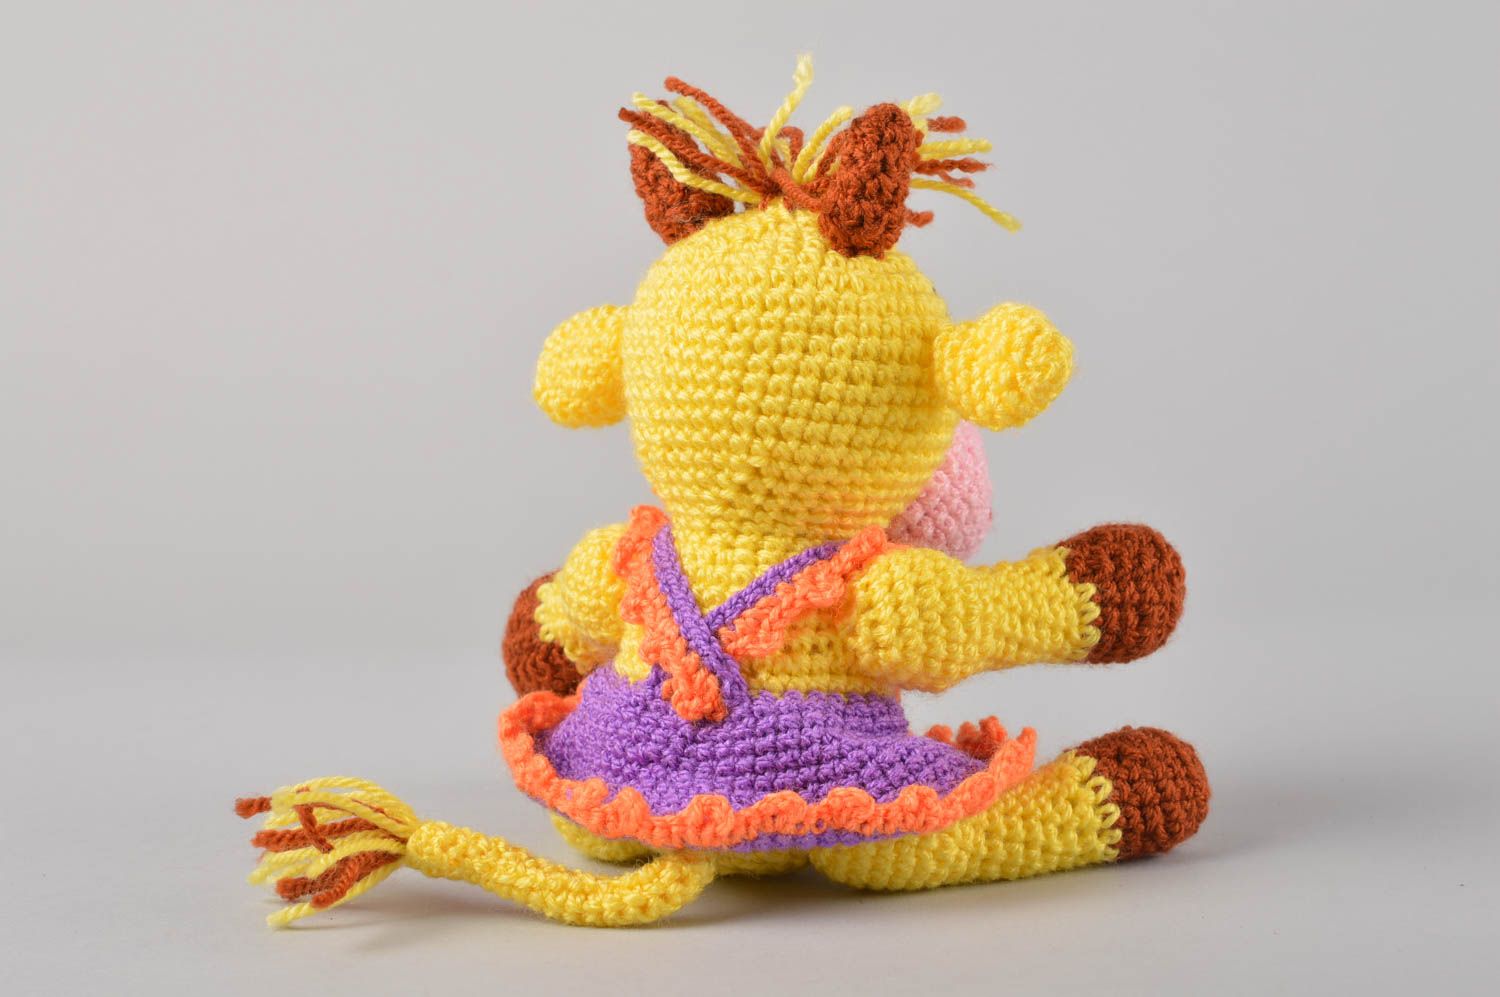 Handmade toy soft toy crocheted toy gift ideas gift for baby designer toy photo 2